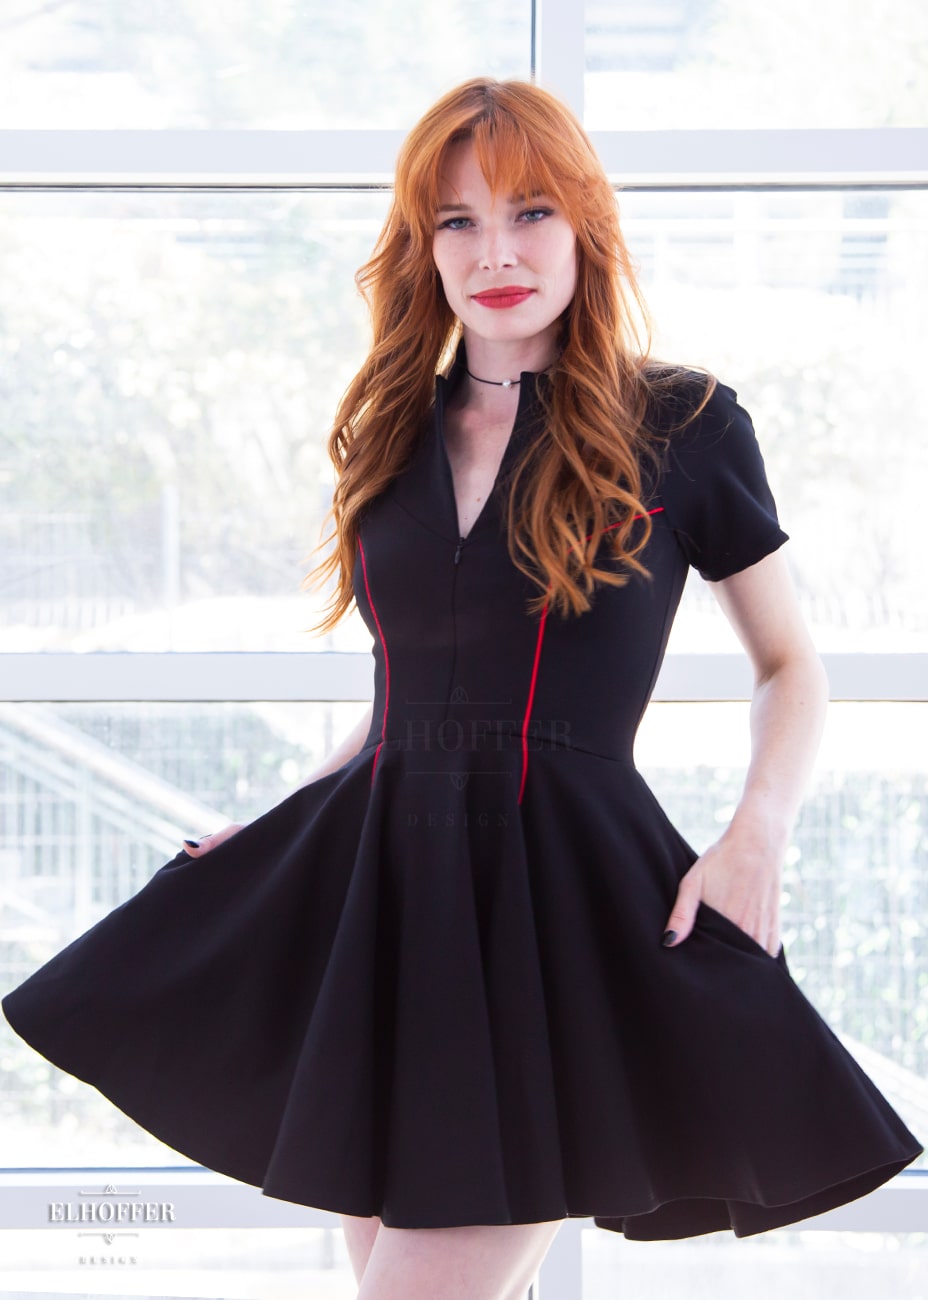 Chloe, a fair skinned size XS model with red hair and bangs, is wearing short raglan sleeved dress with a high neck, invisible front zipper, and princess seams on the front and back as well as pockets. The dress is black with red piping details.